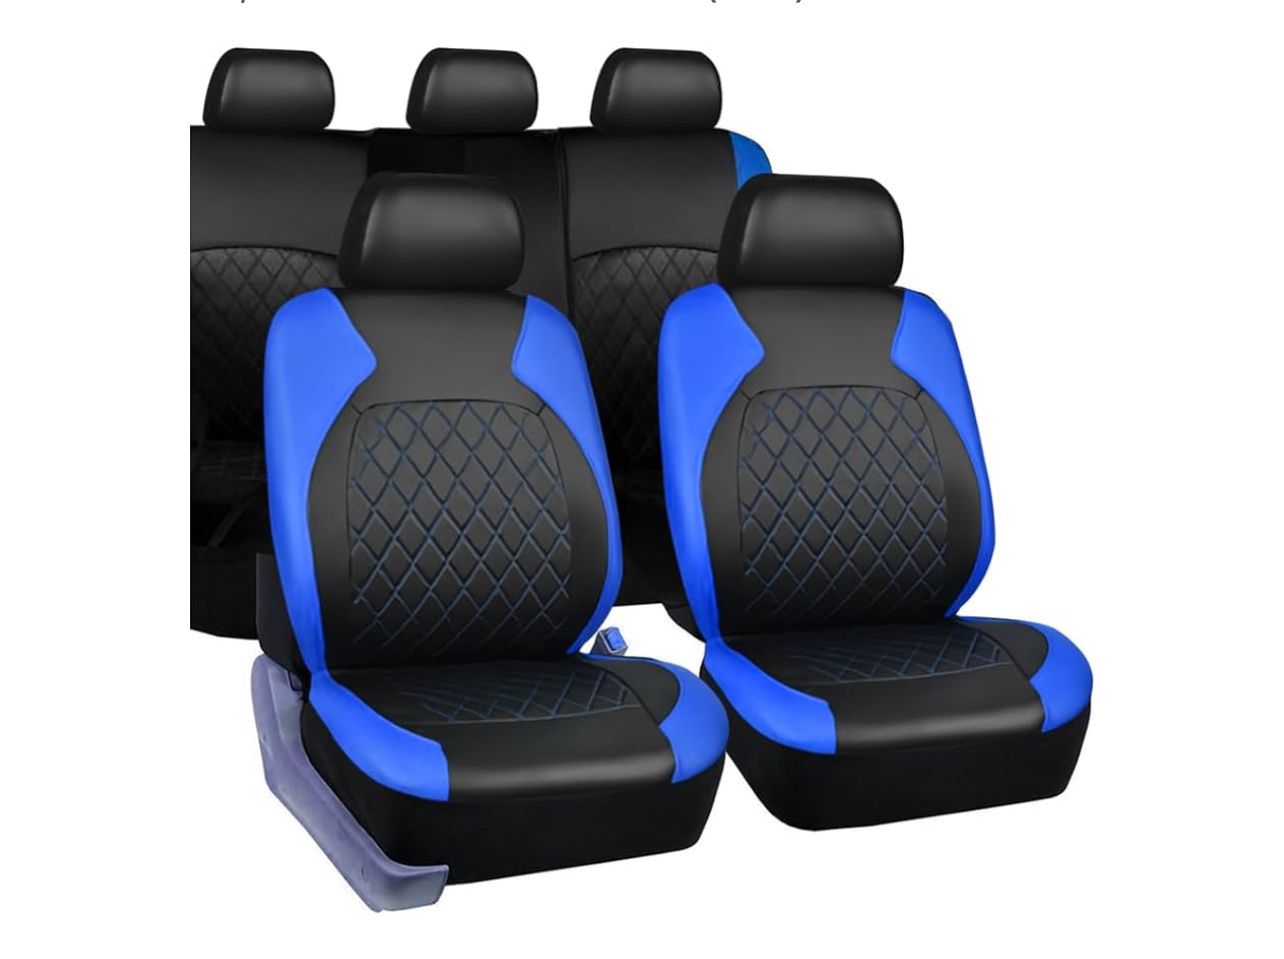 Full Leather Blue Seat Covers For A Sedan 